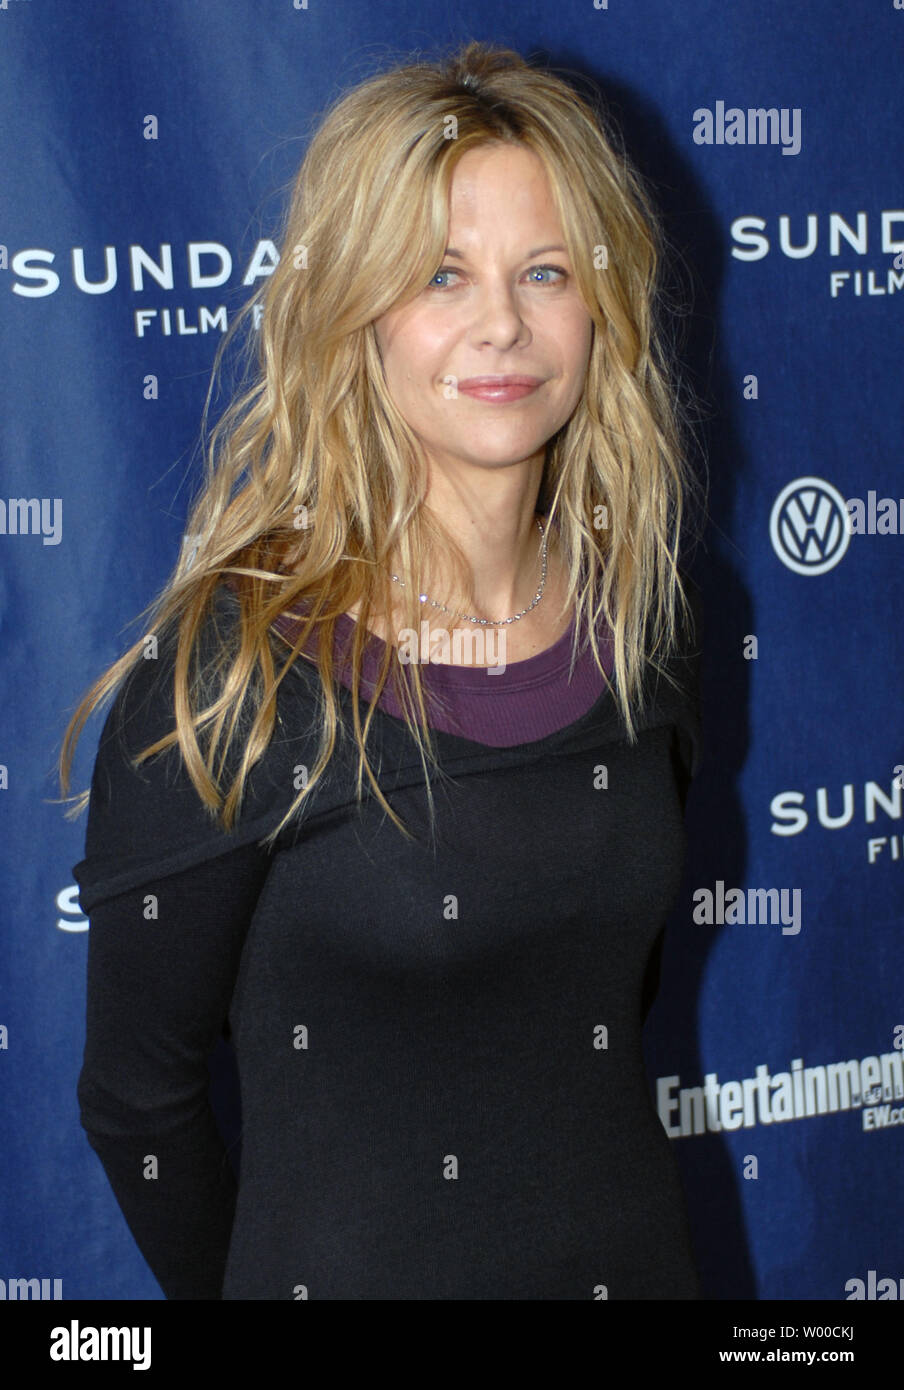 Actress Meg Ryan attends the premiere of her film 'The Deal' at the Eccles Theater during the Sundance Film Festival in Park City, Utah on January 22, 2008. (UPI Photo/Alexis C. Glenn) Stock Photo